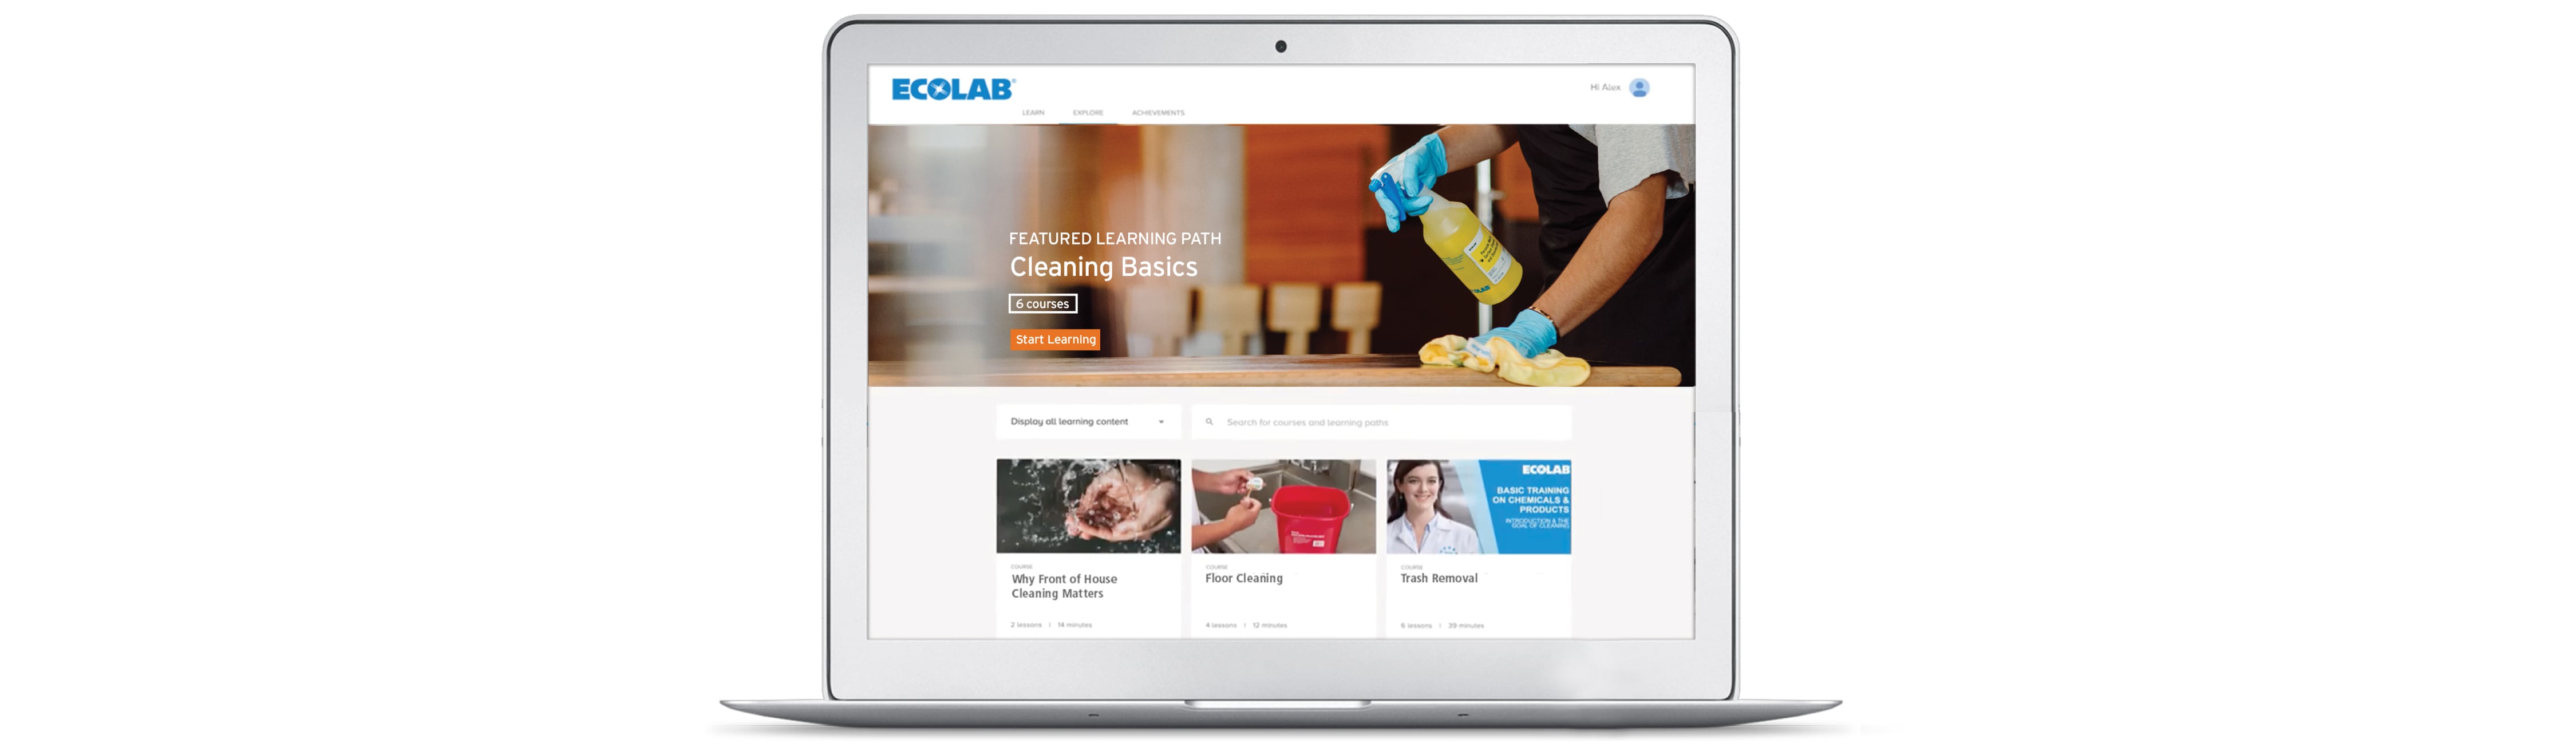 Laptop and iPhone displaying Ecolab On-Demand Digital Training